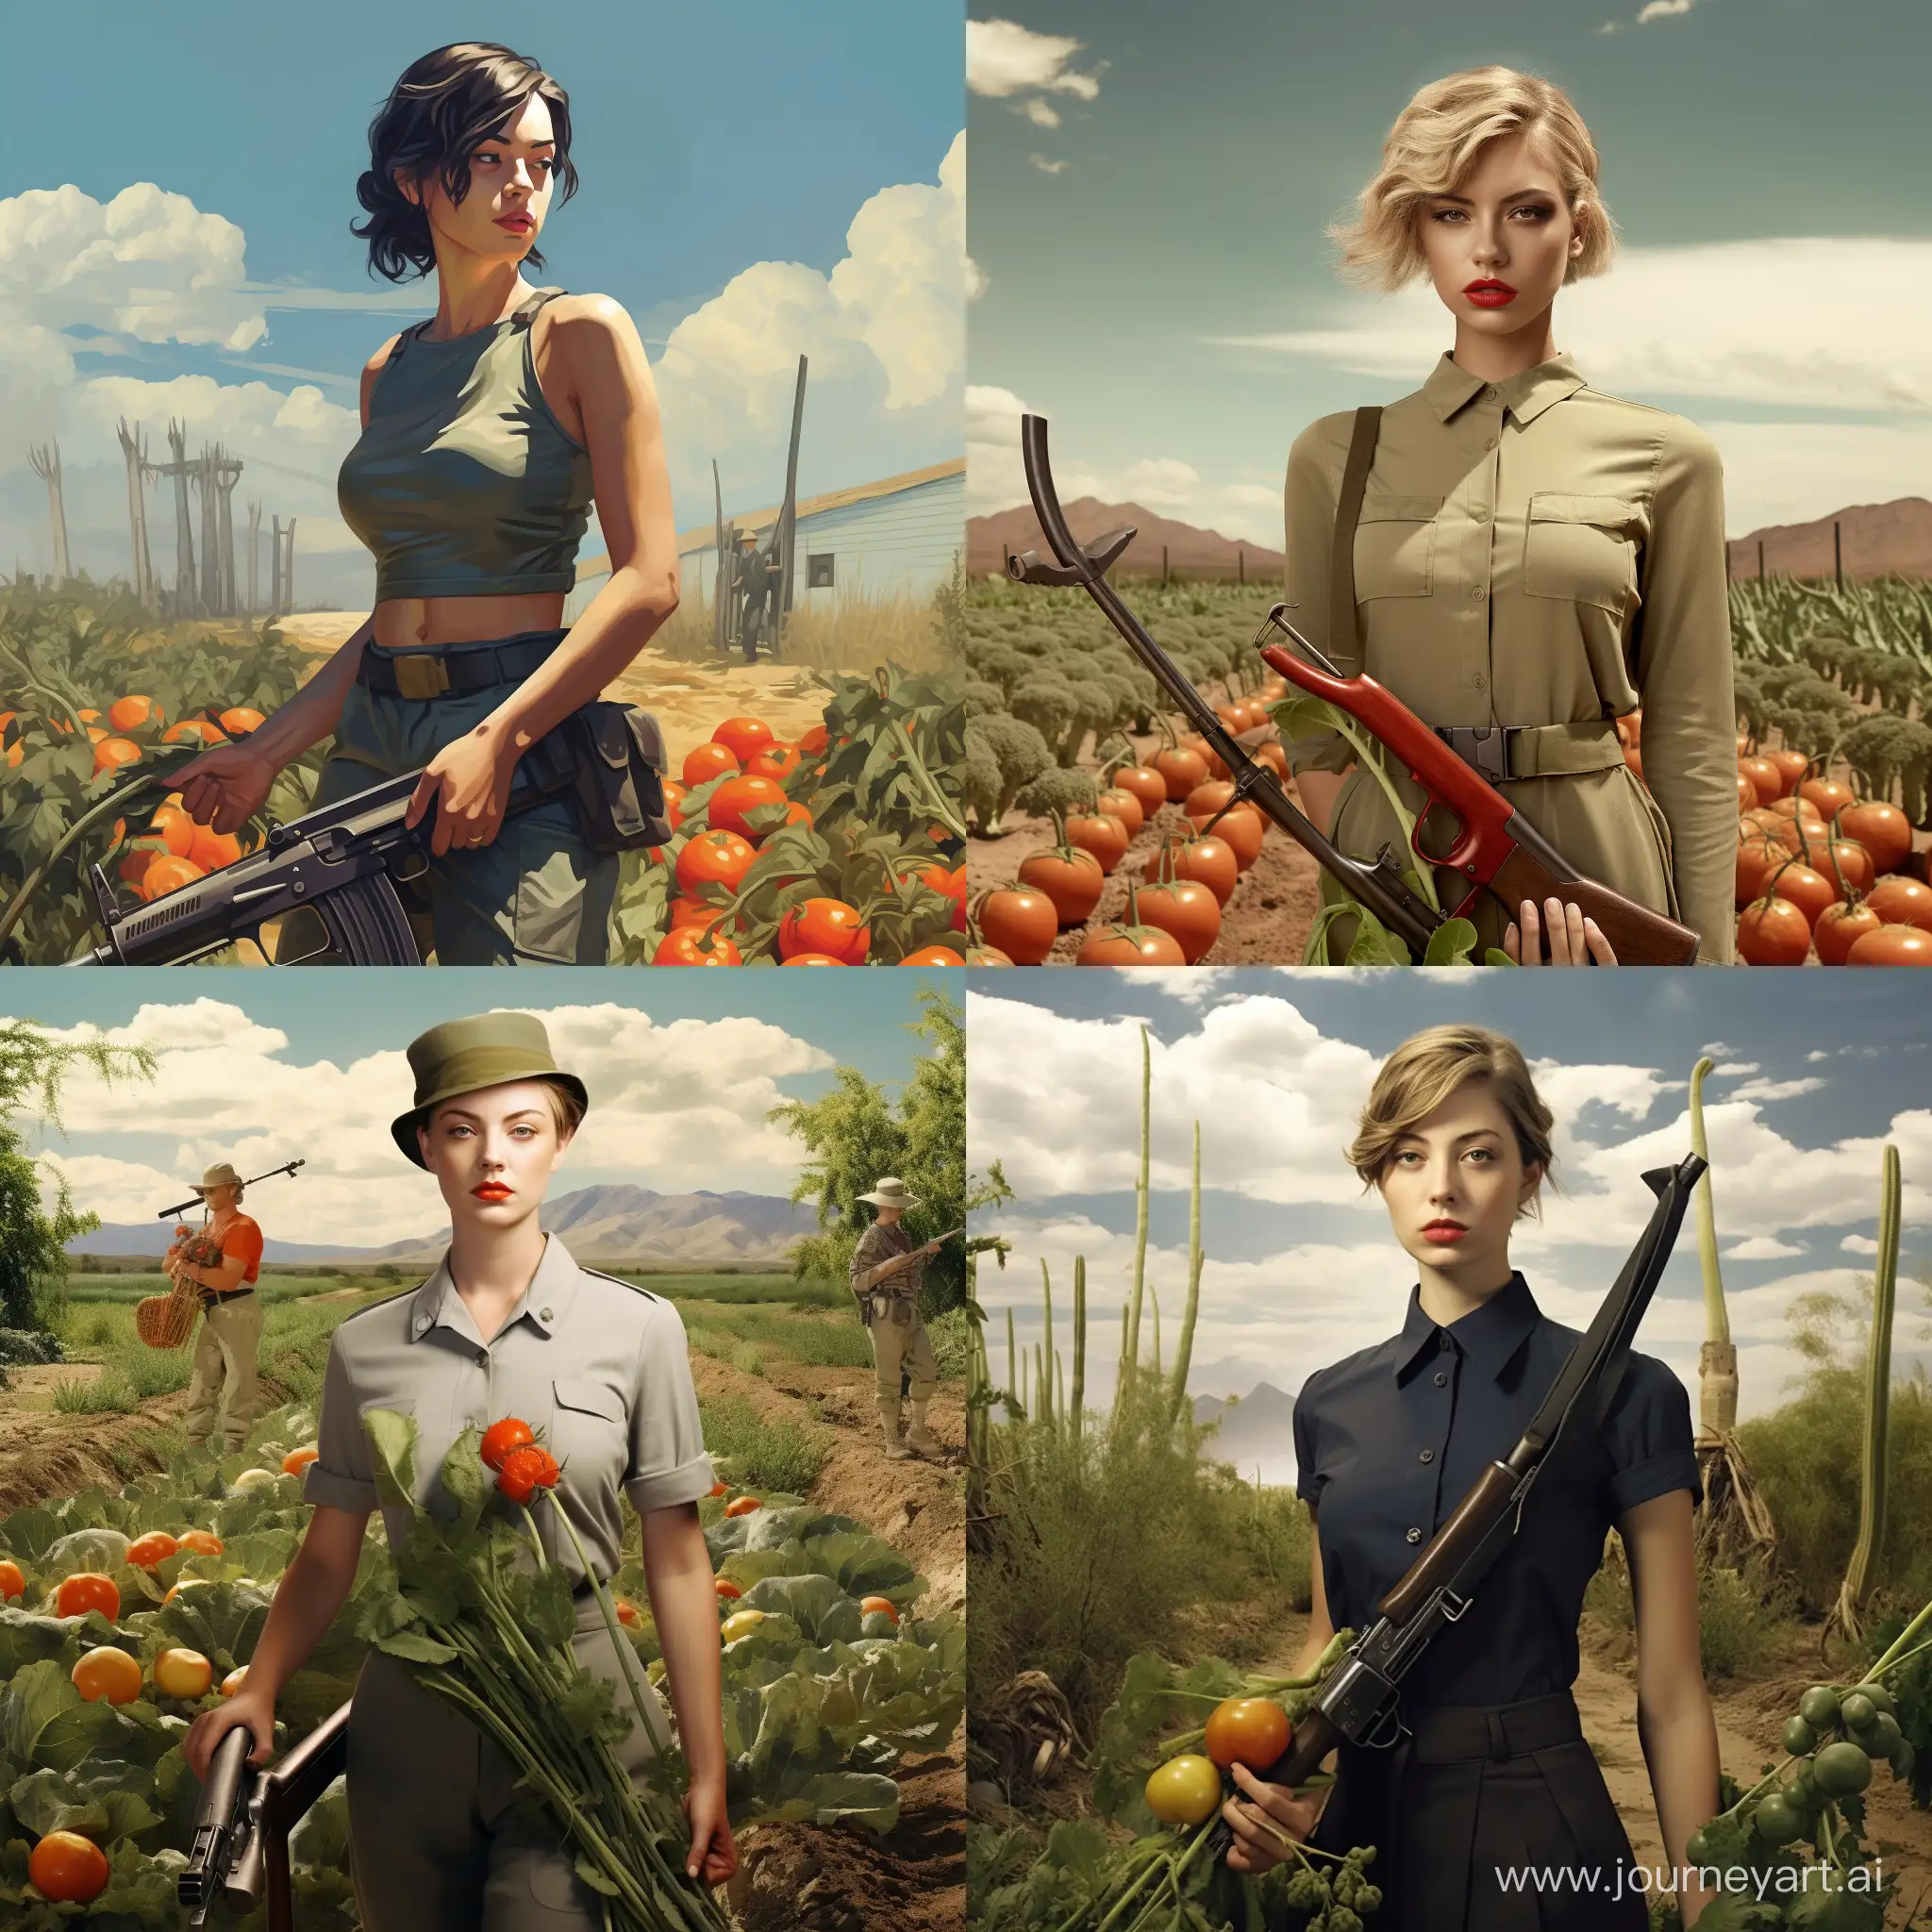 Contemporary-Female-Soldier-Cultivating-Murcia-Orchard-with-Fresh-Produce